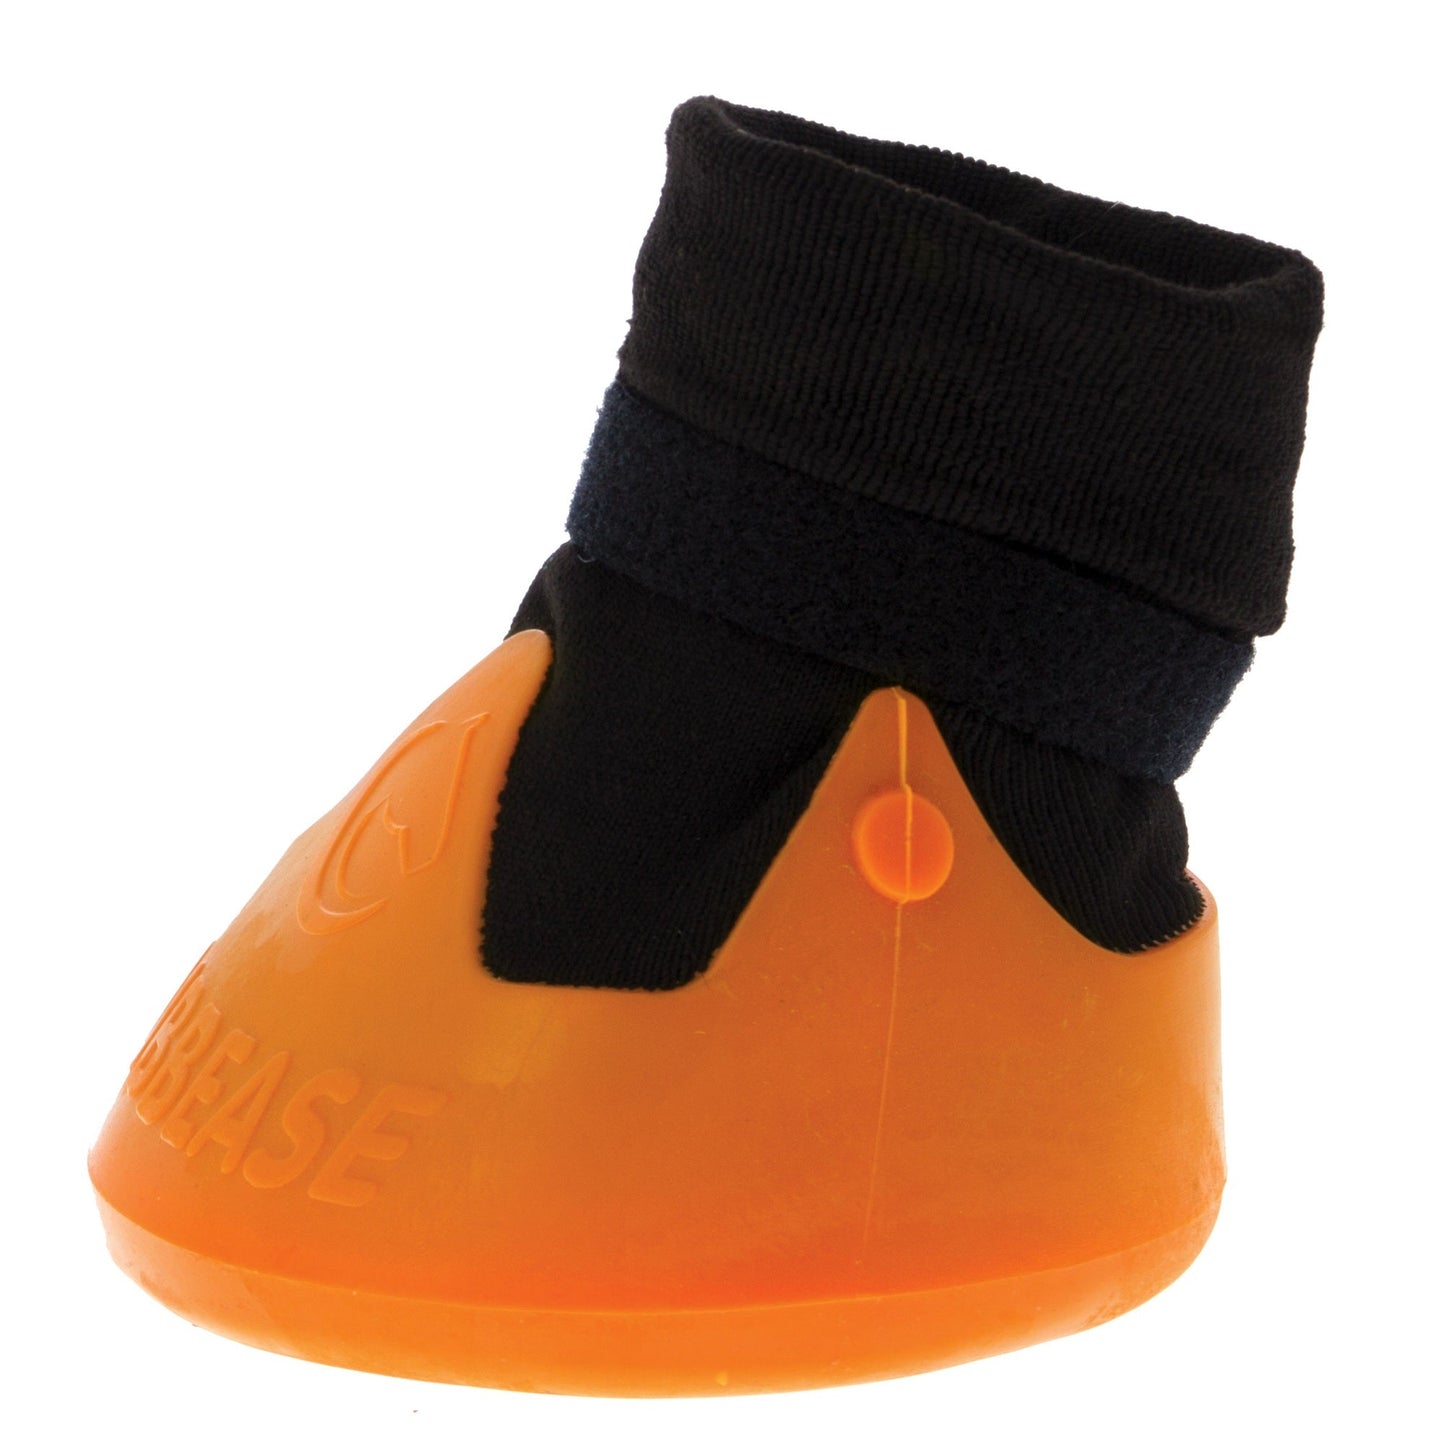 An orange plastic horse hoof boot with a black securing strap, isolated on a white background.